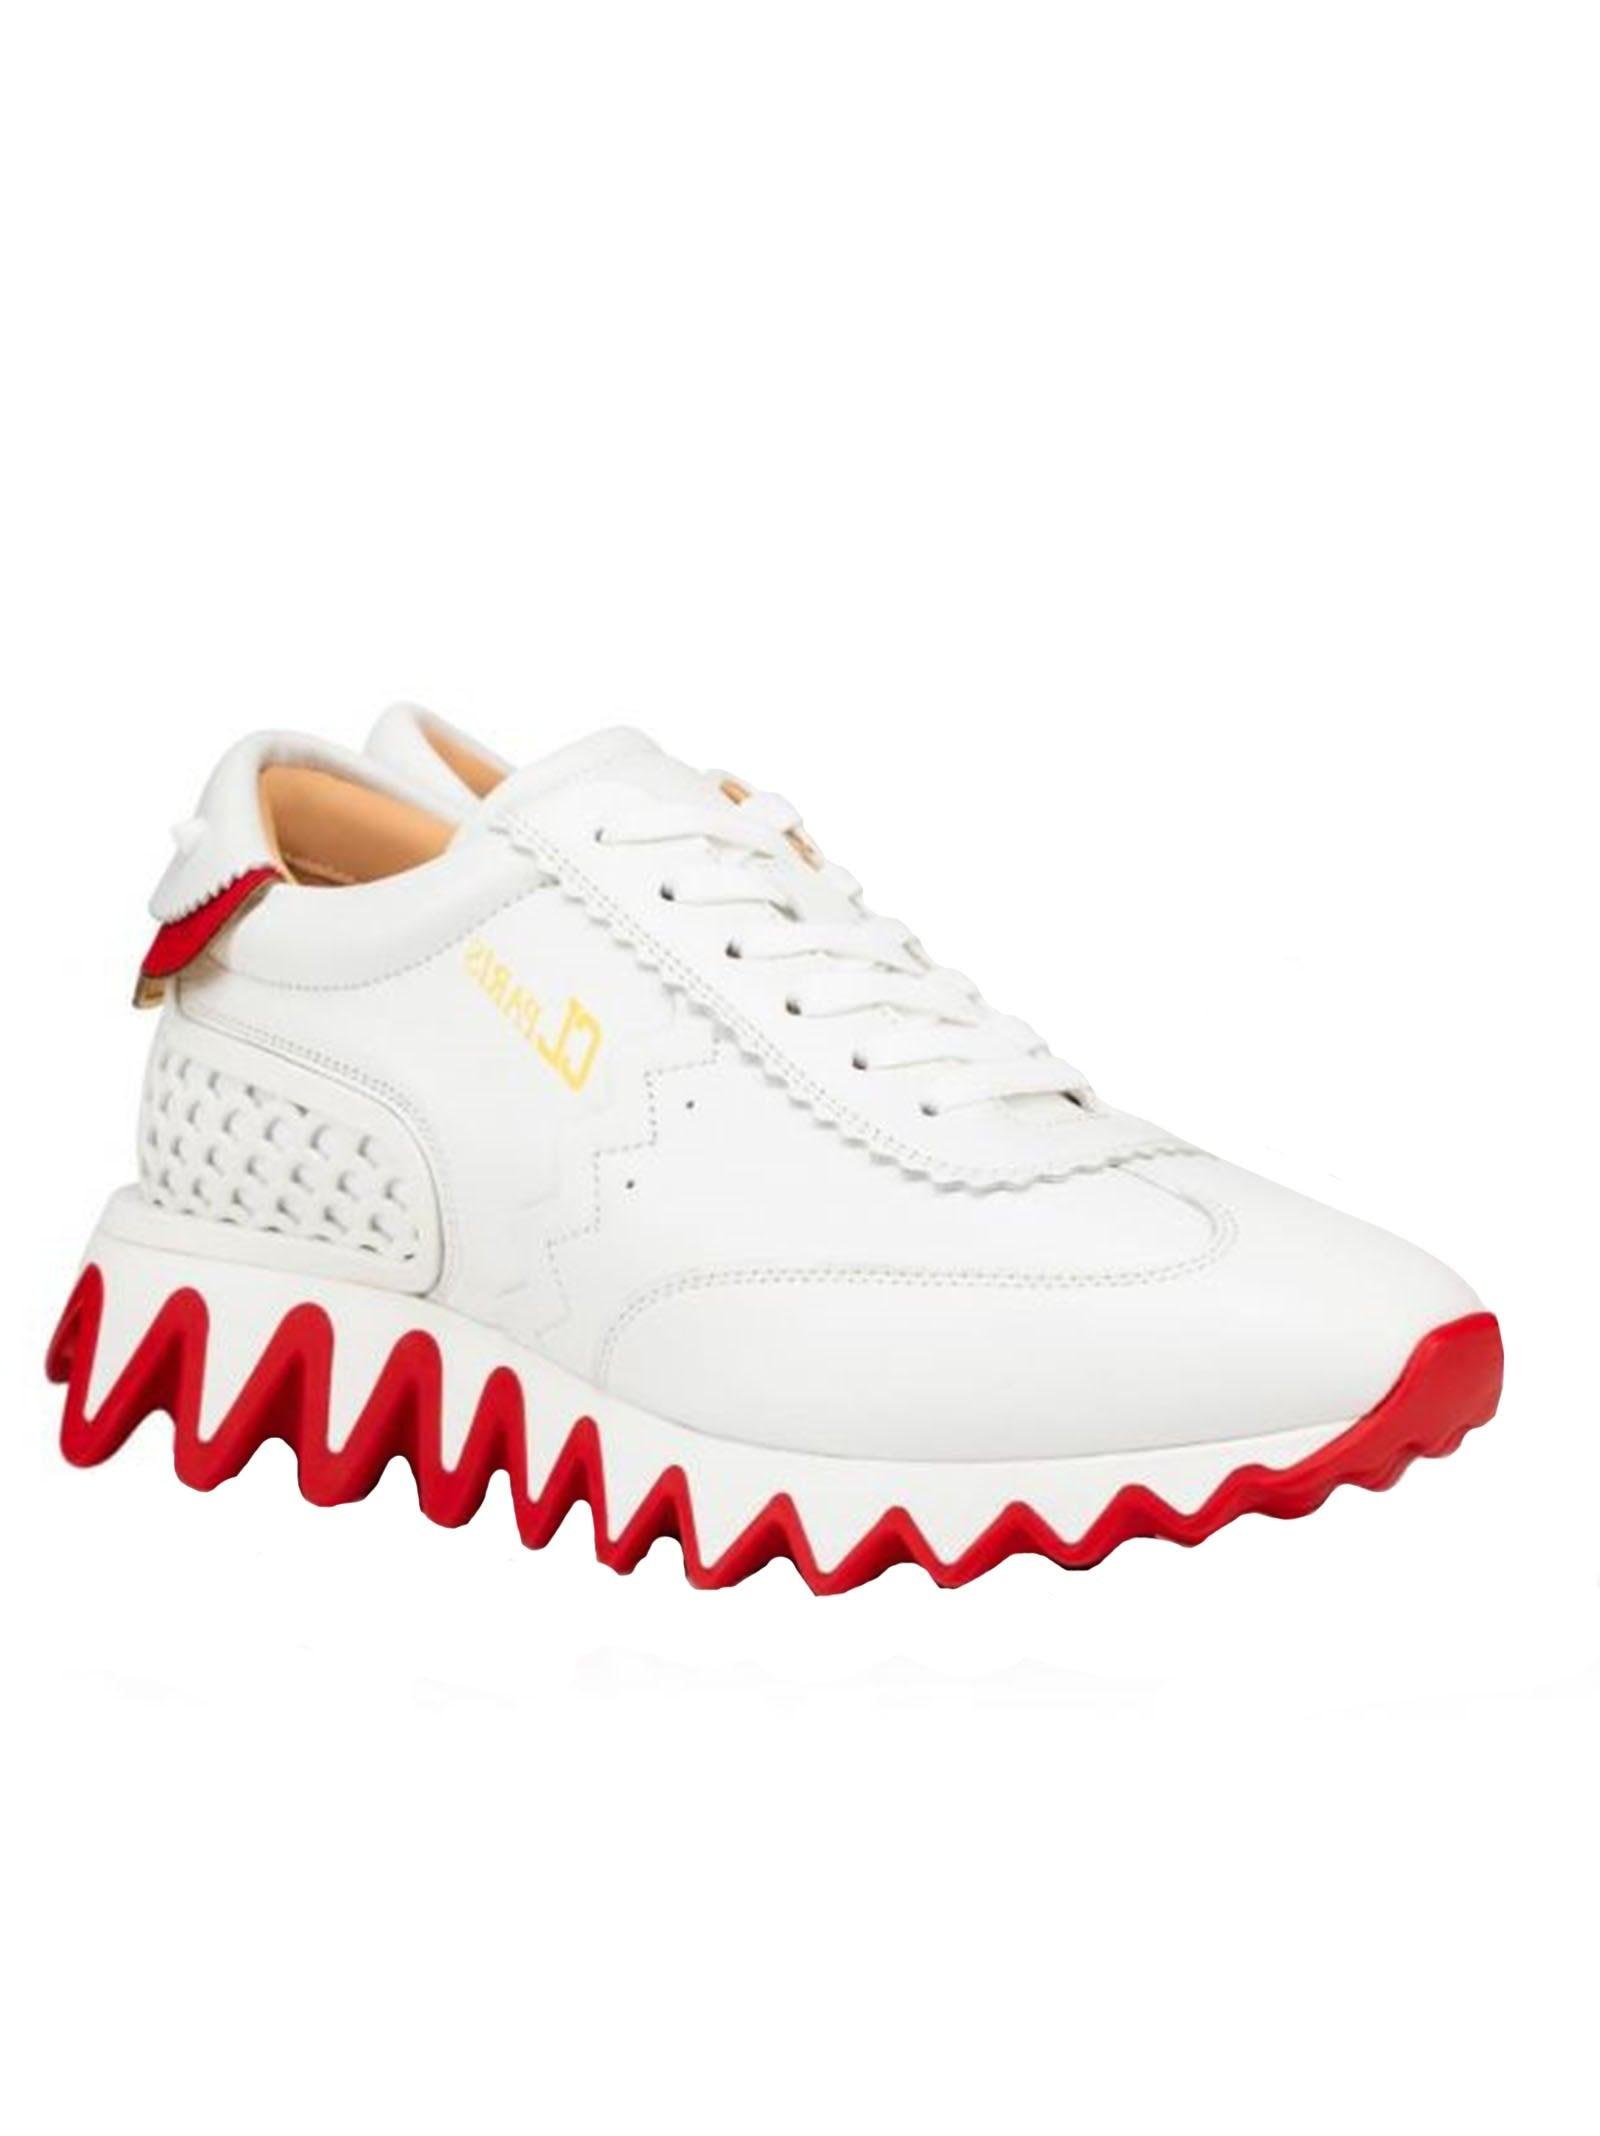 Christian Louboutin Leather Loubishark Sneakers in Red | Lyst